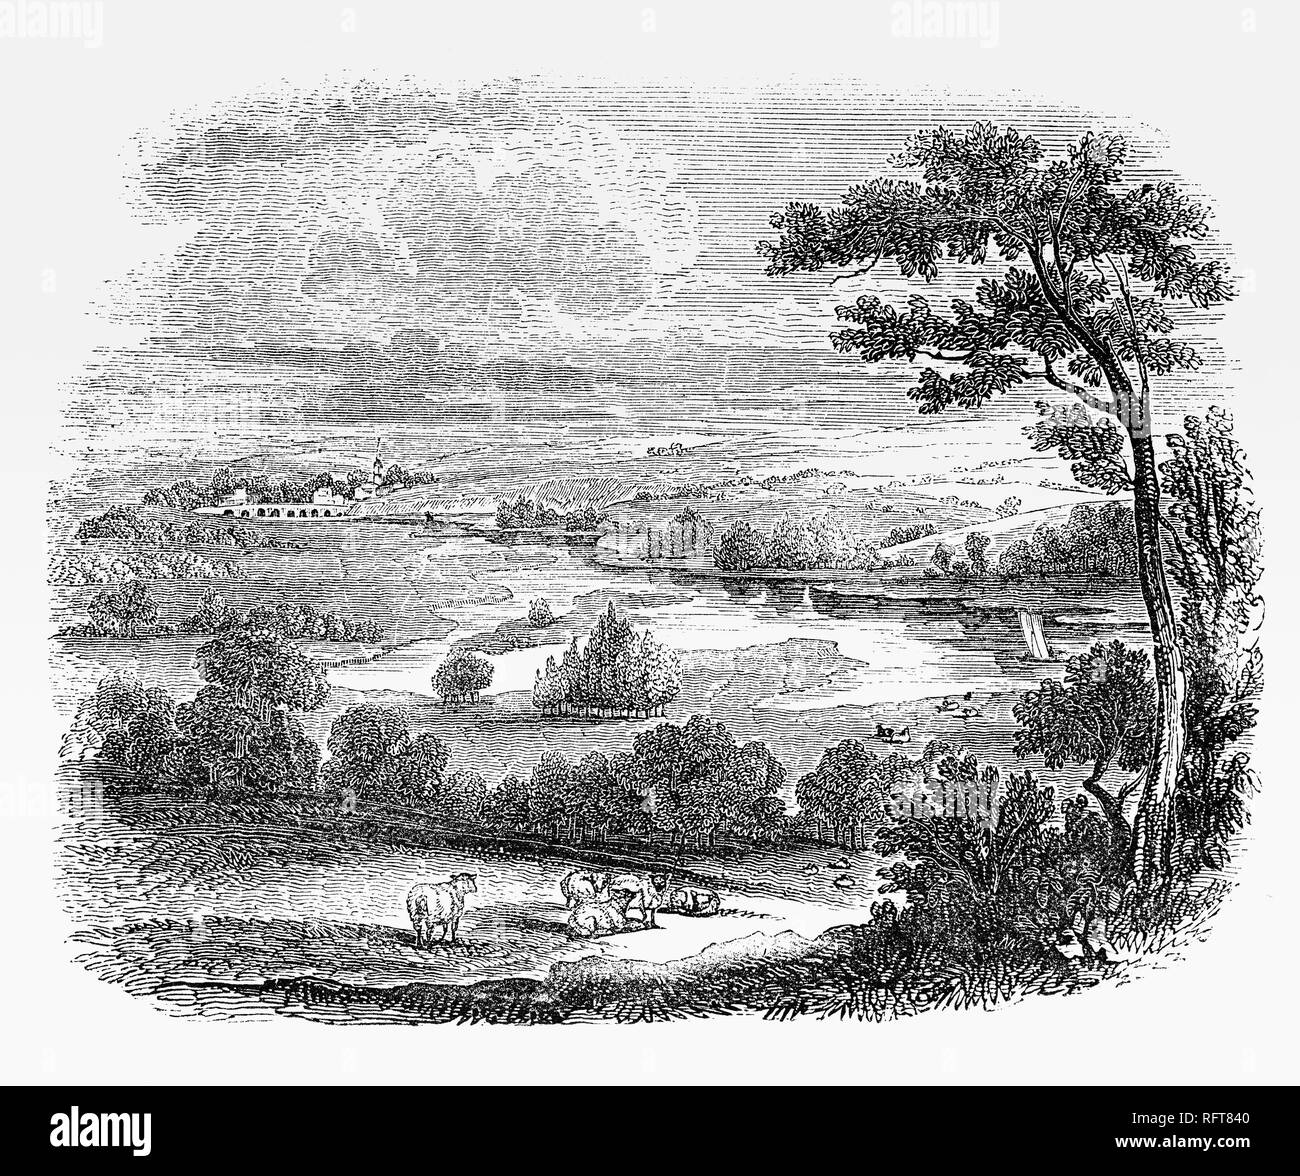 An 18th Century view of the River Thames flood plain near Wallingford, a historic market town and civil parish located to the south of Oxford in England. The Blackstone family owned an estate  around Wallingford where Sir William Blackstone, a famous English jurist, judge and Tory politician , built a house called Castle Priory.  William is most noted for writing the Commentaries on the Laws of England; these are noted for their influence on the American Constitution. Stock Photo